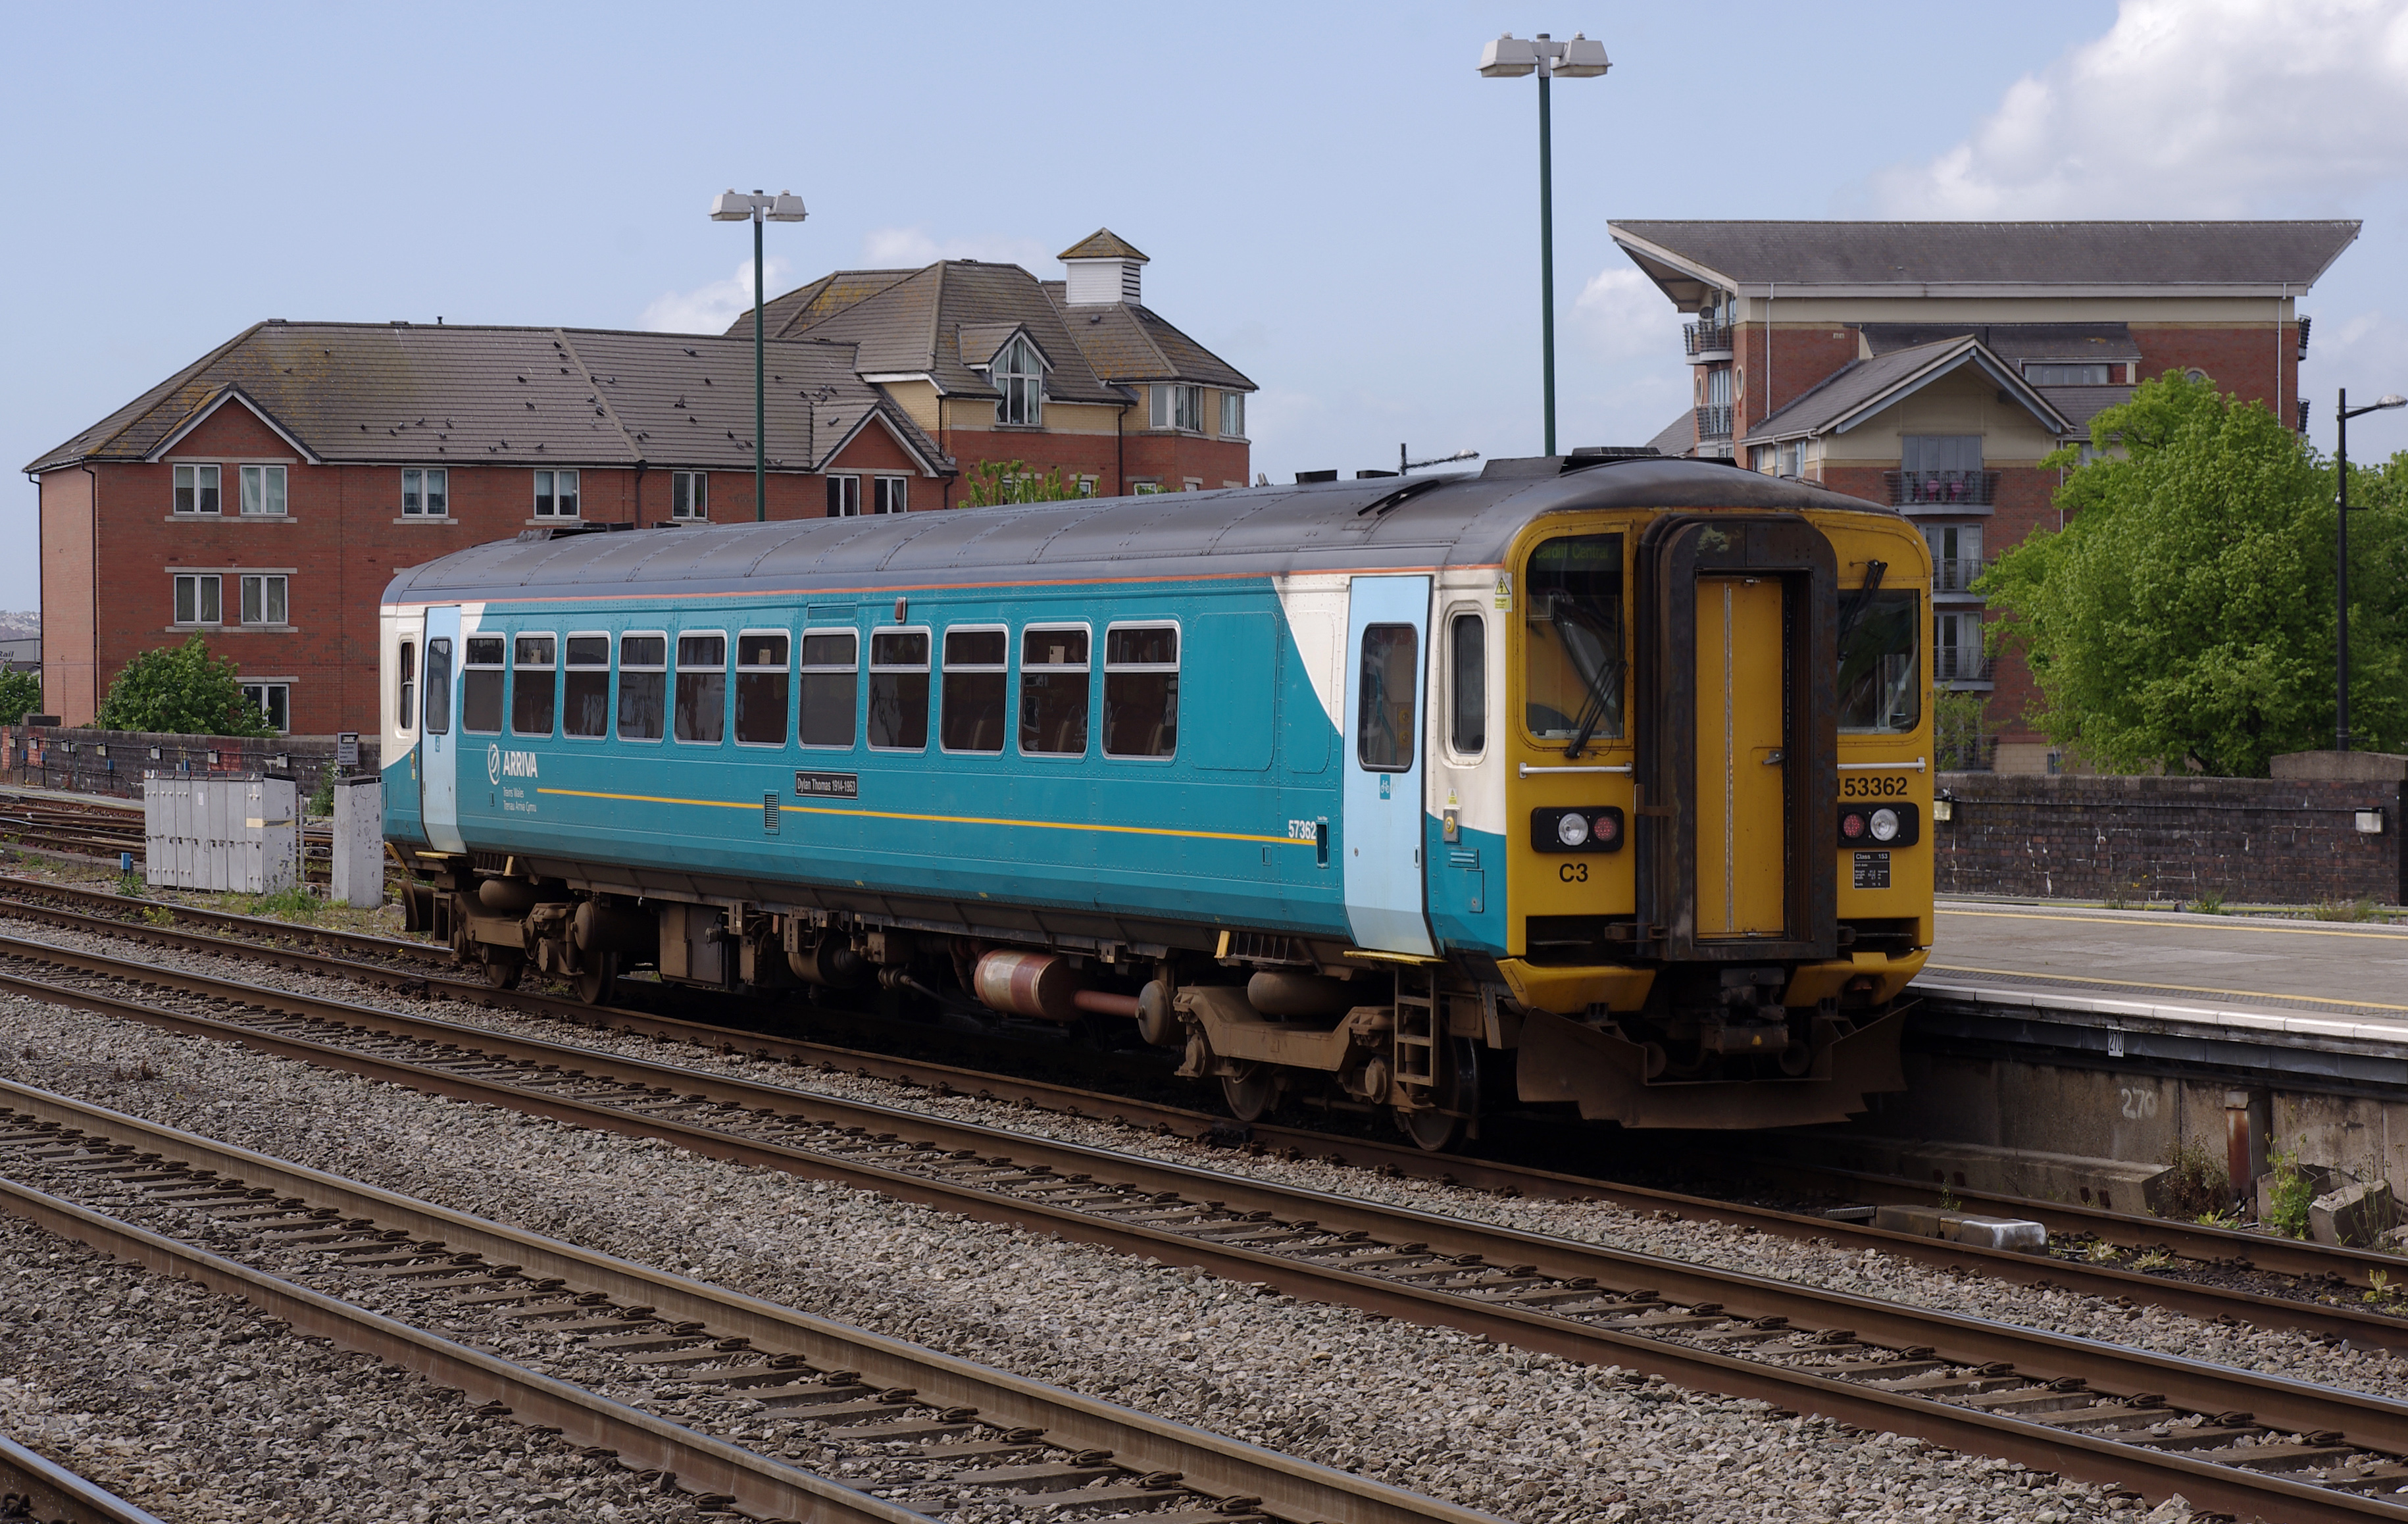 Cardiff Central railway station MMB 33 153362